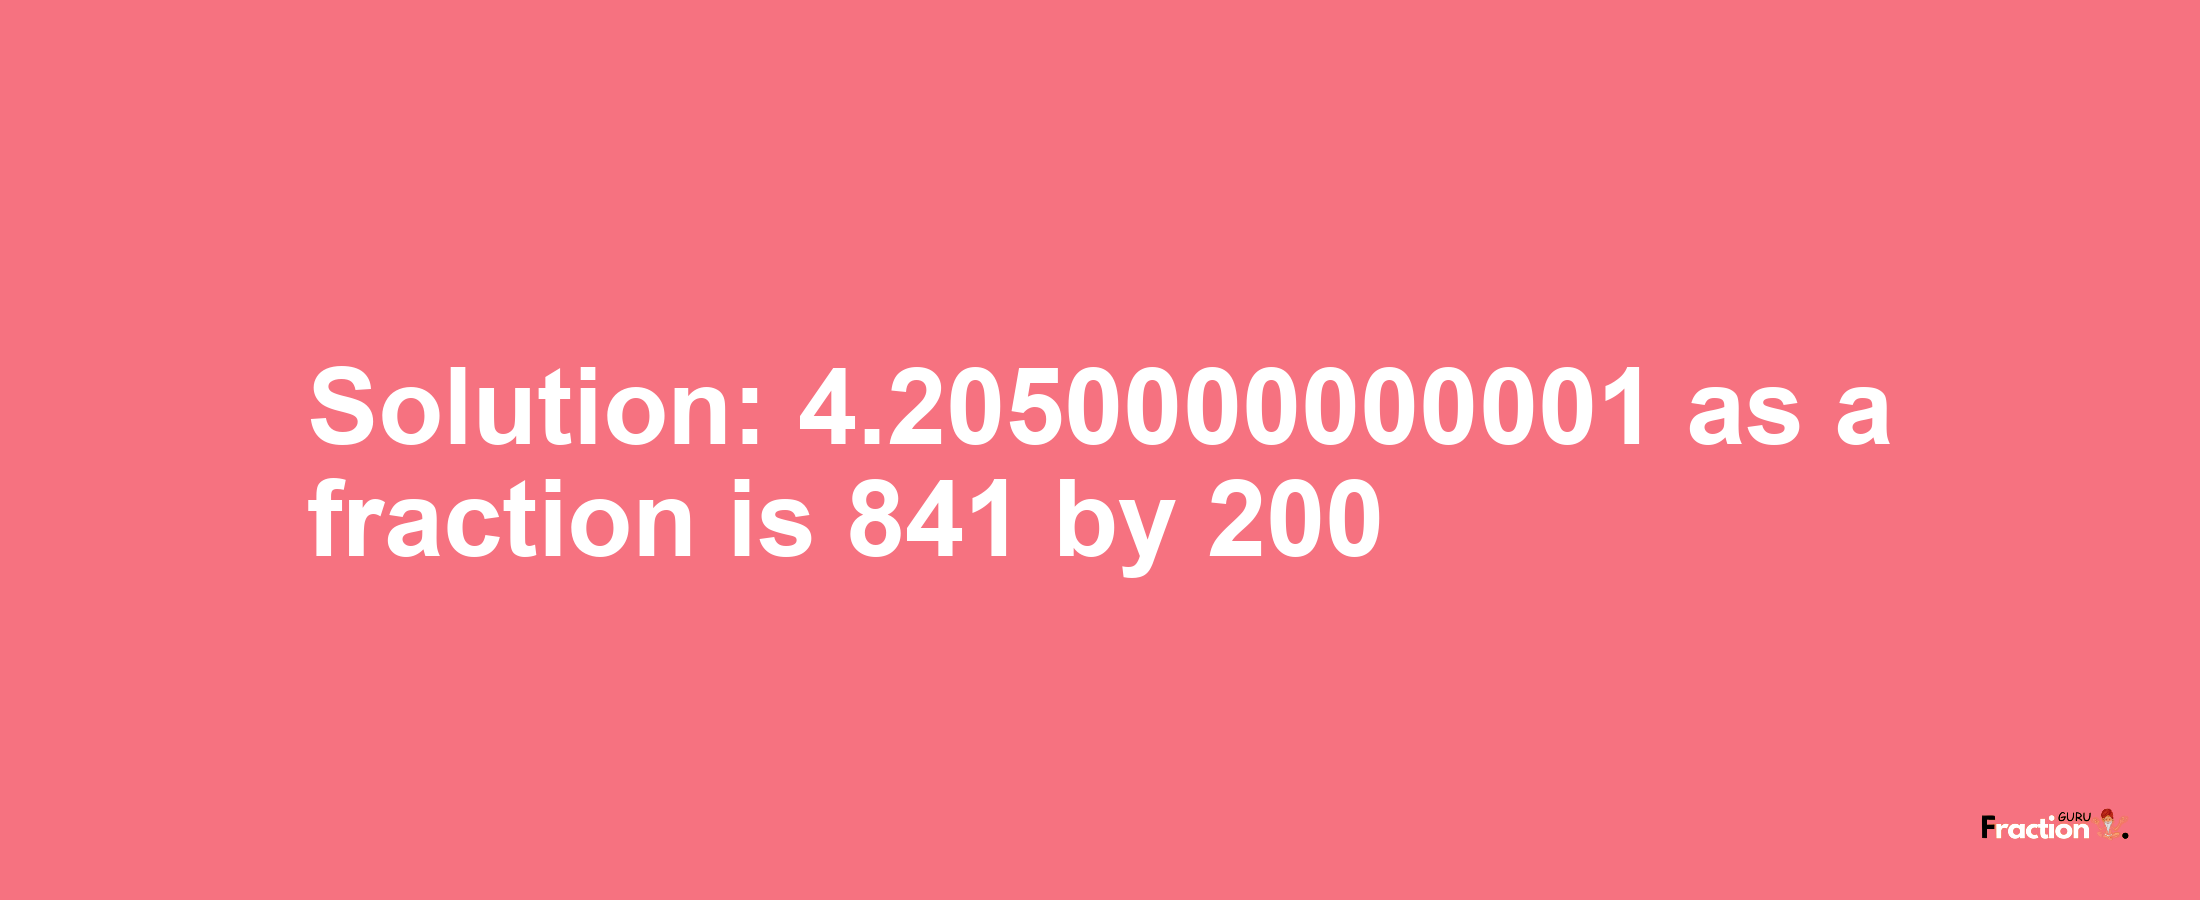 Solution:4.2050000000001 as a fraction is 841/200